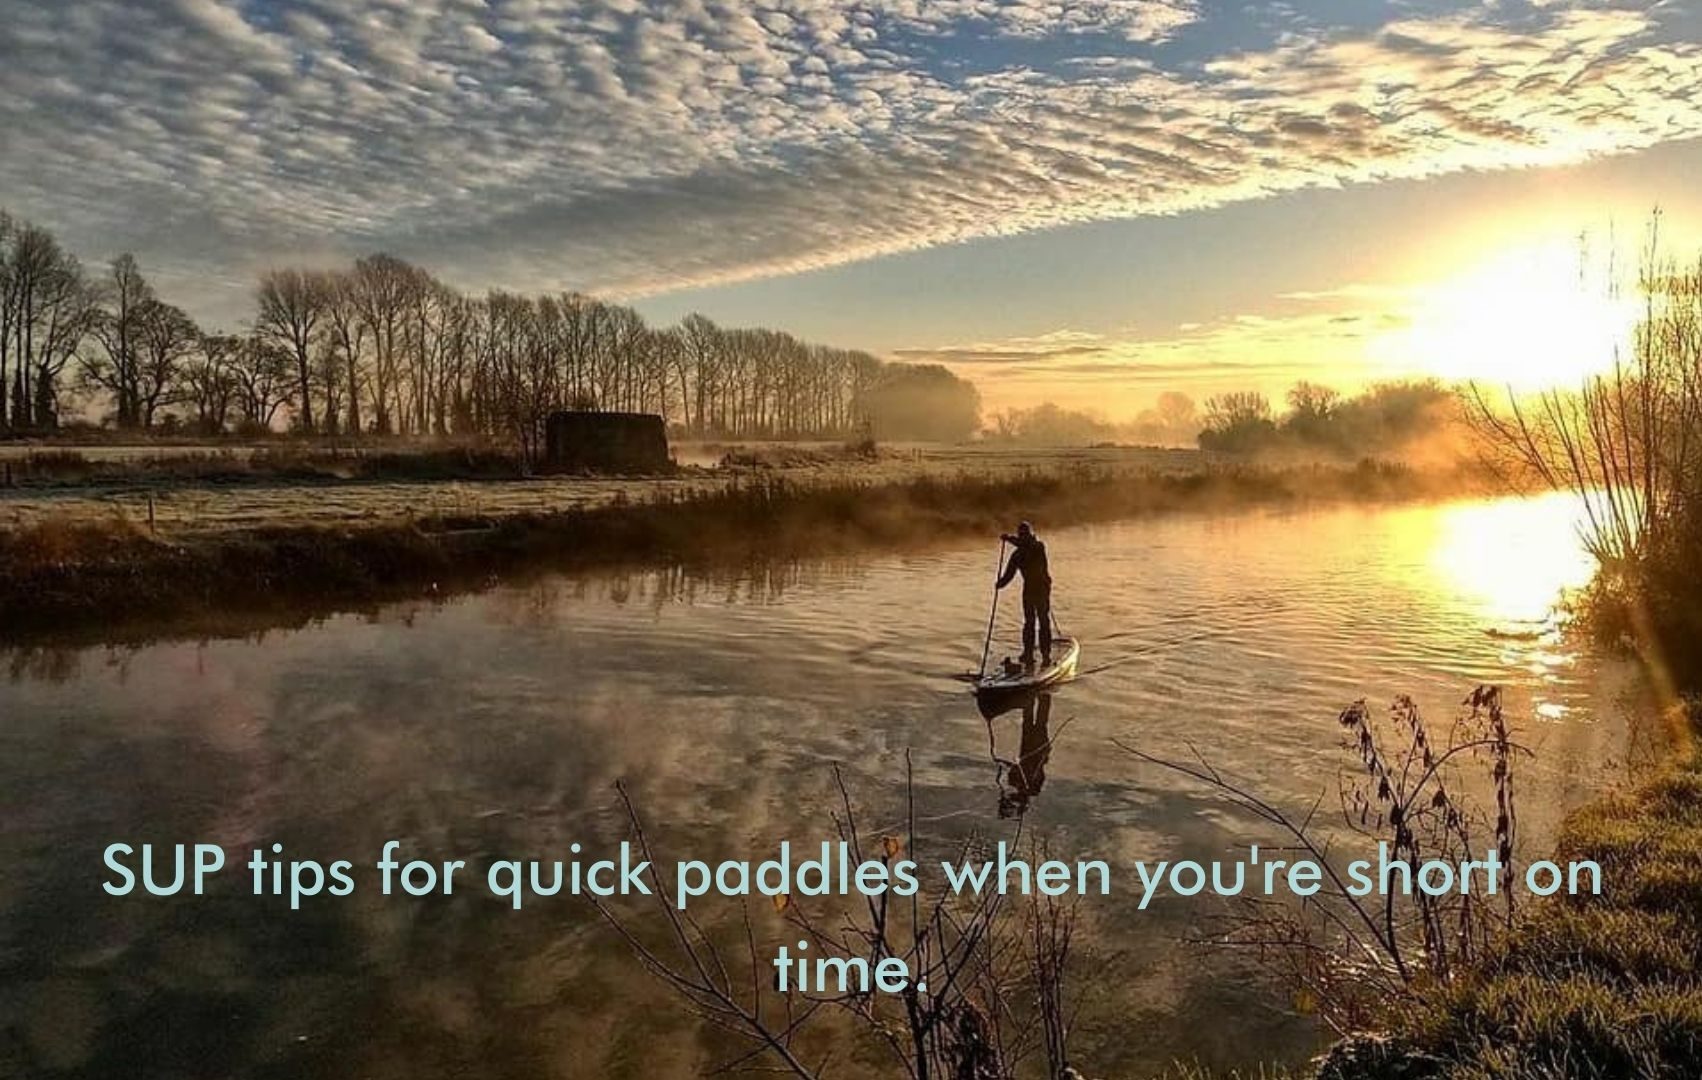 You are currently viewing SUP tips for quick paddles when you’re short on time.